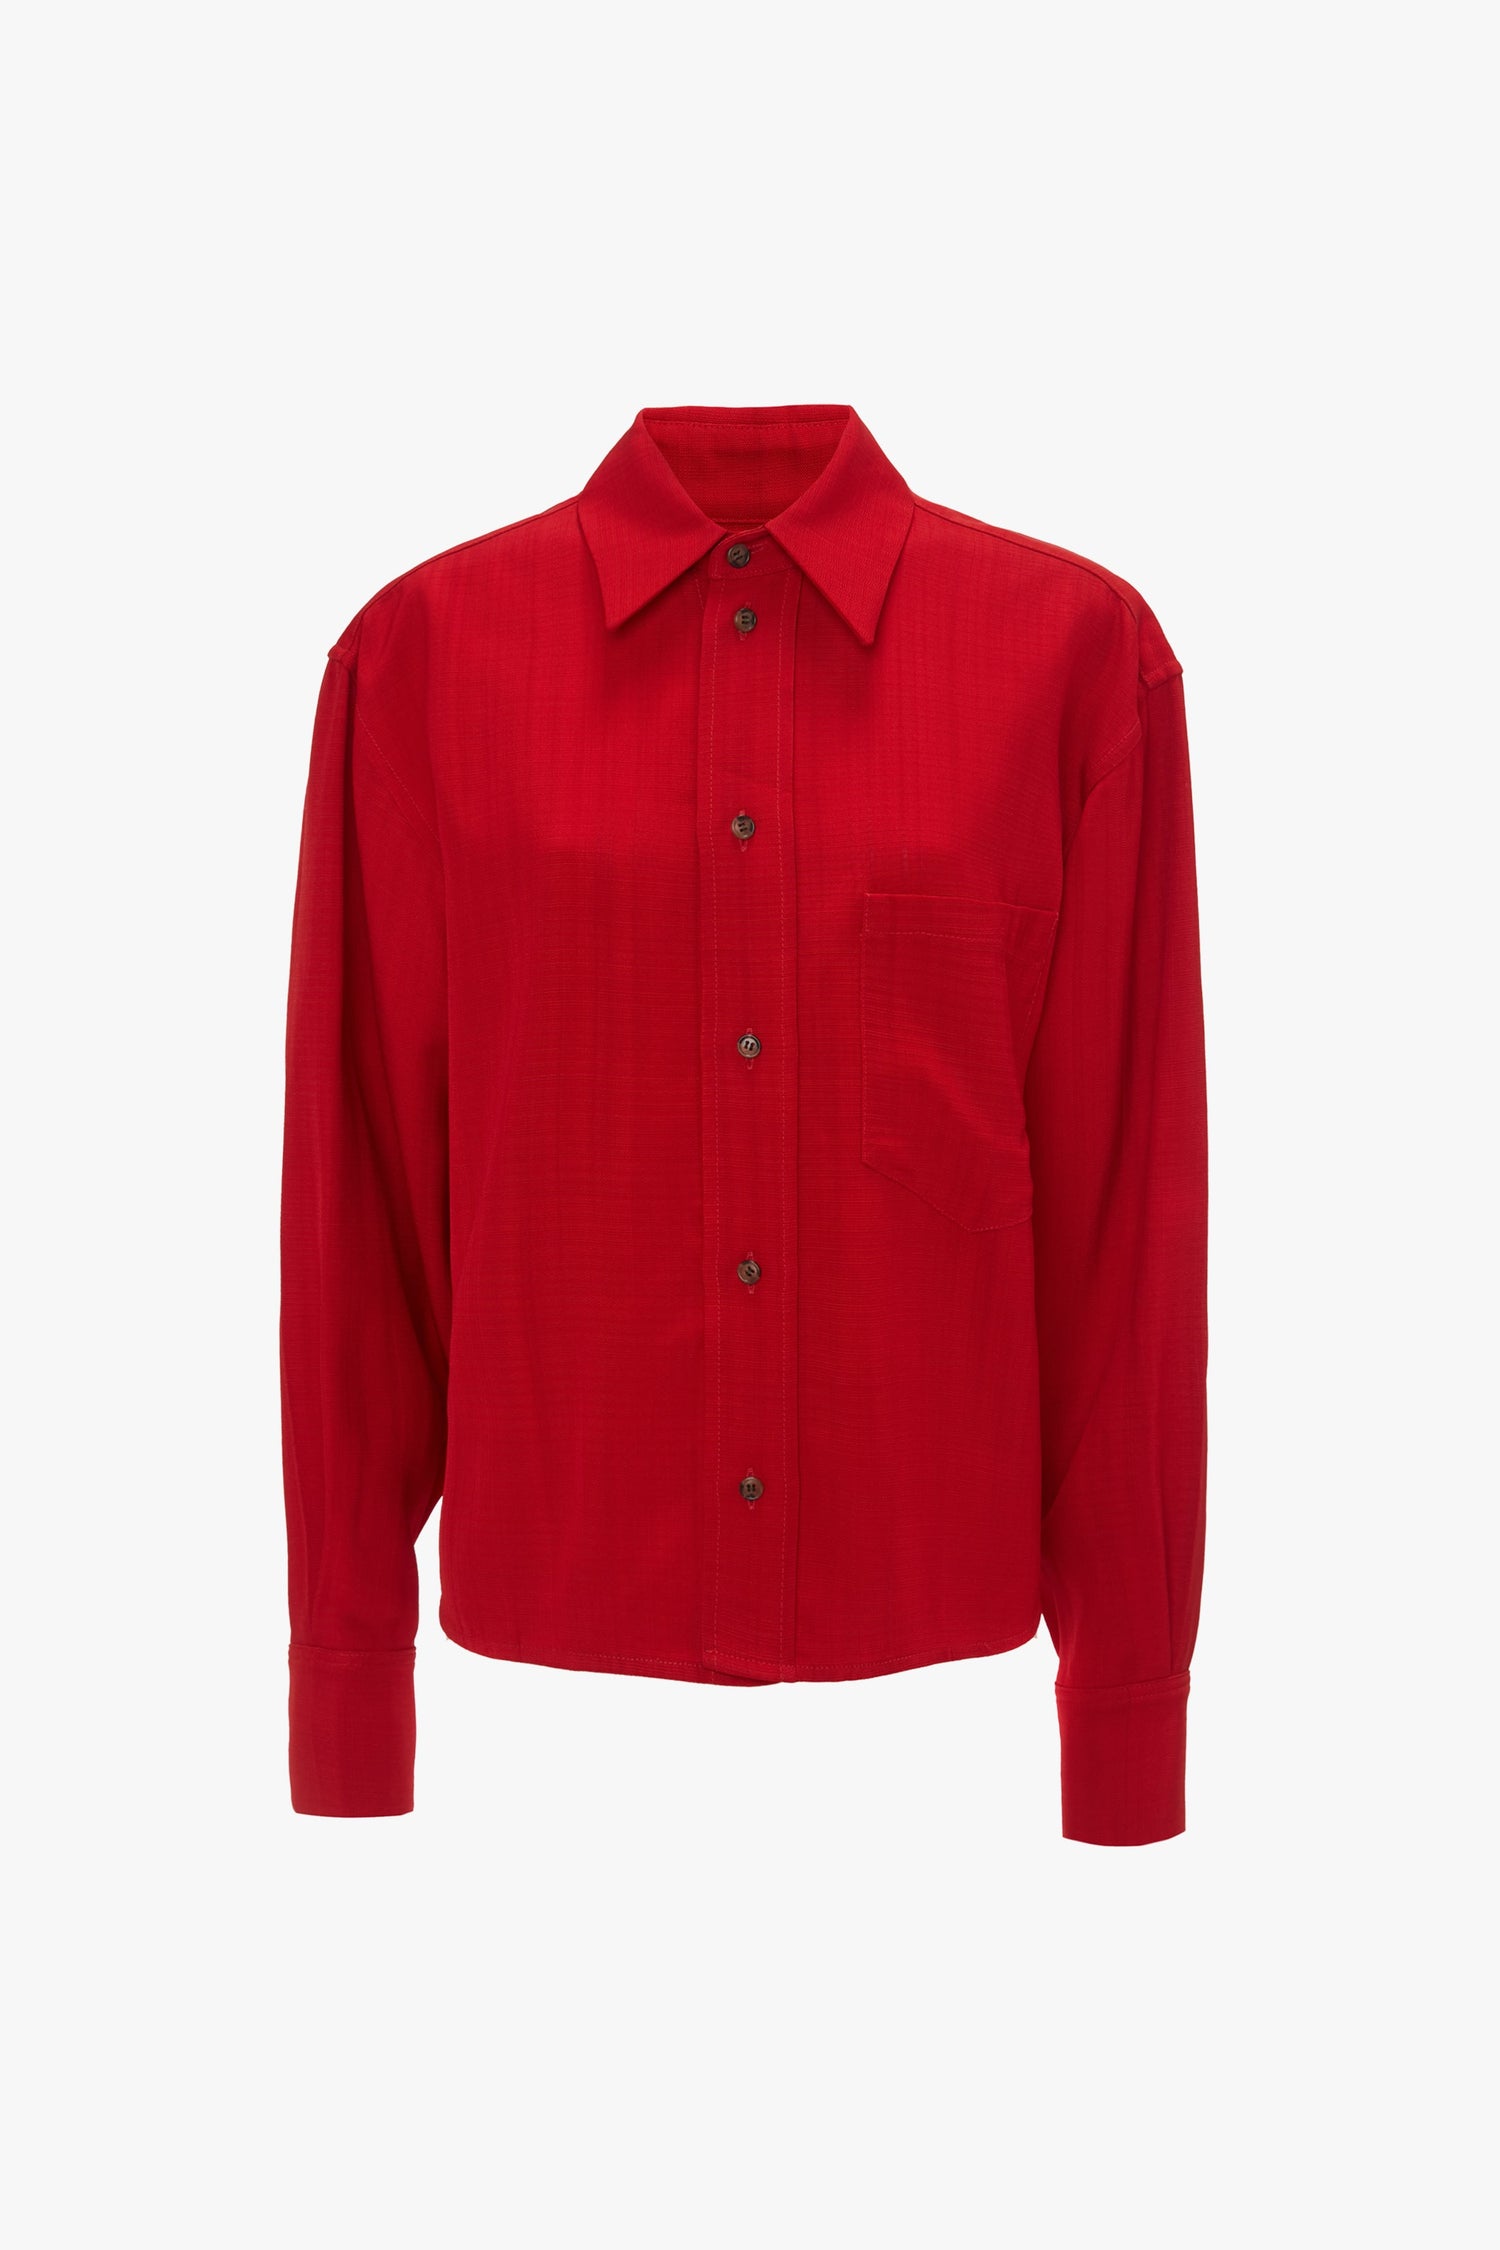 A waist-defining Cropped Long Sleeve Shirt In Carmine by Victoria Beckham, displayed against a plain white background.